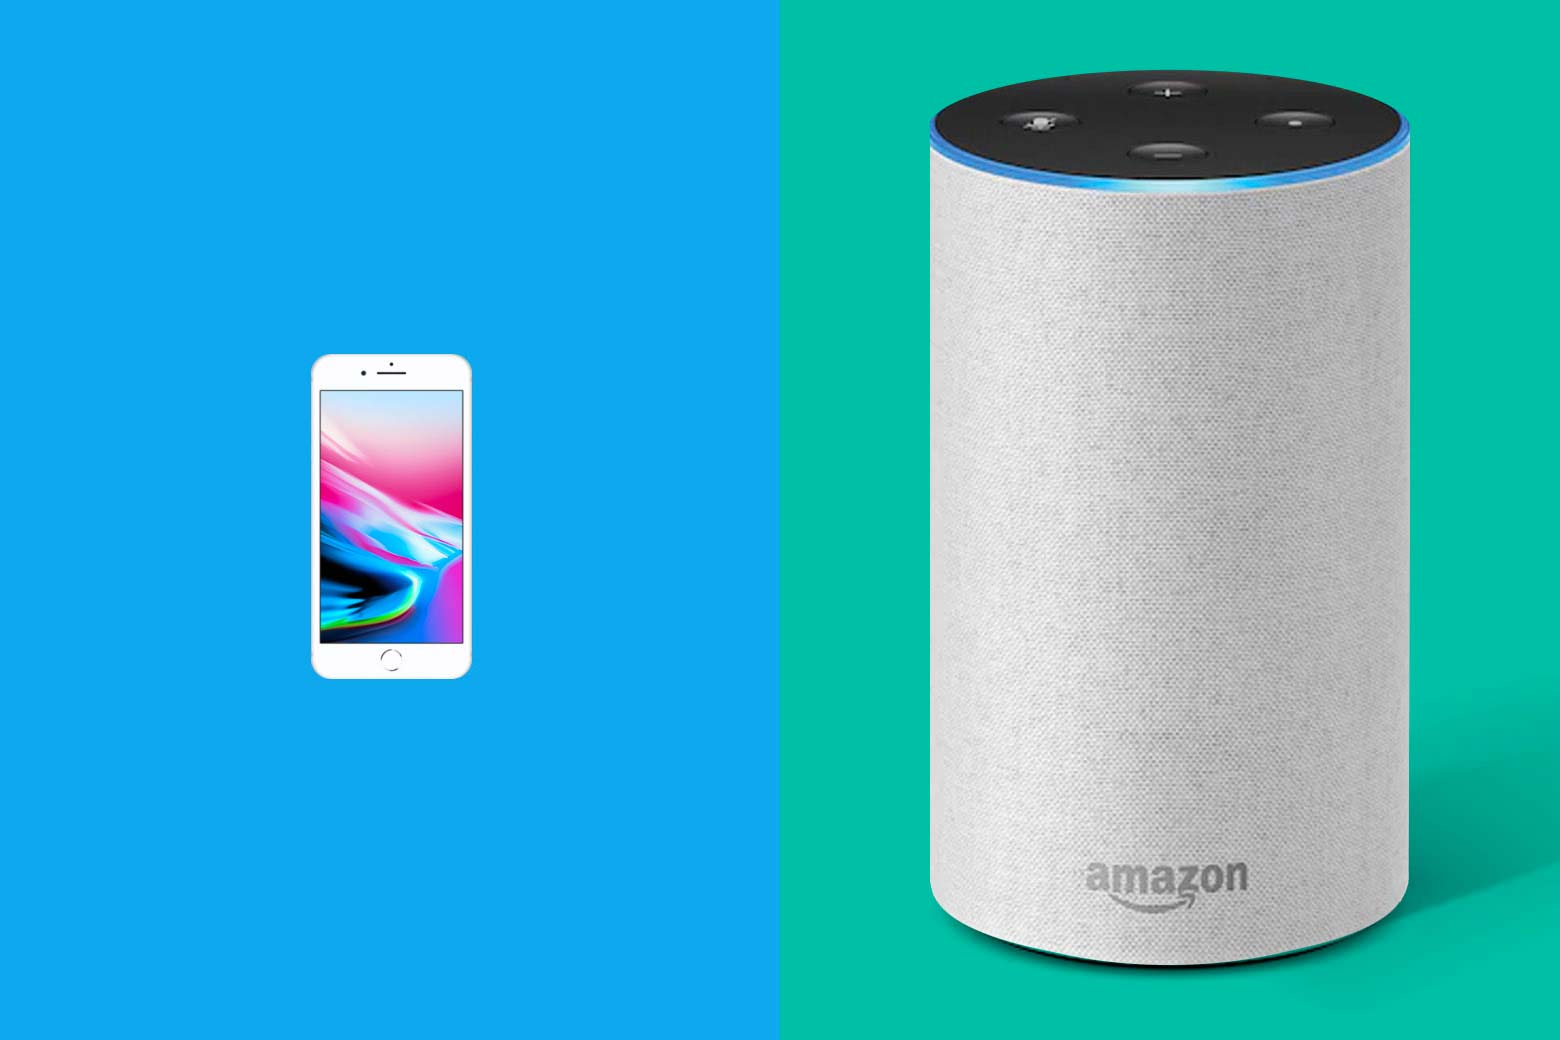 does the amazon echo work with iphone